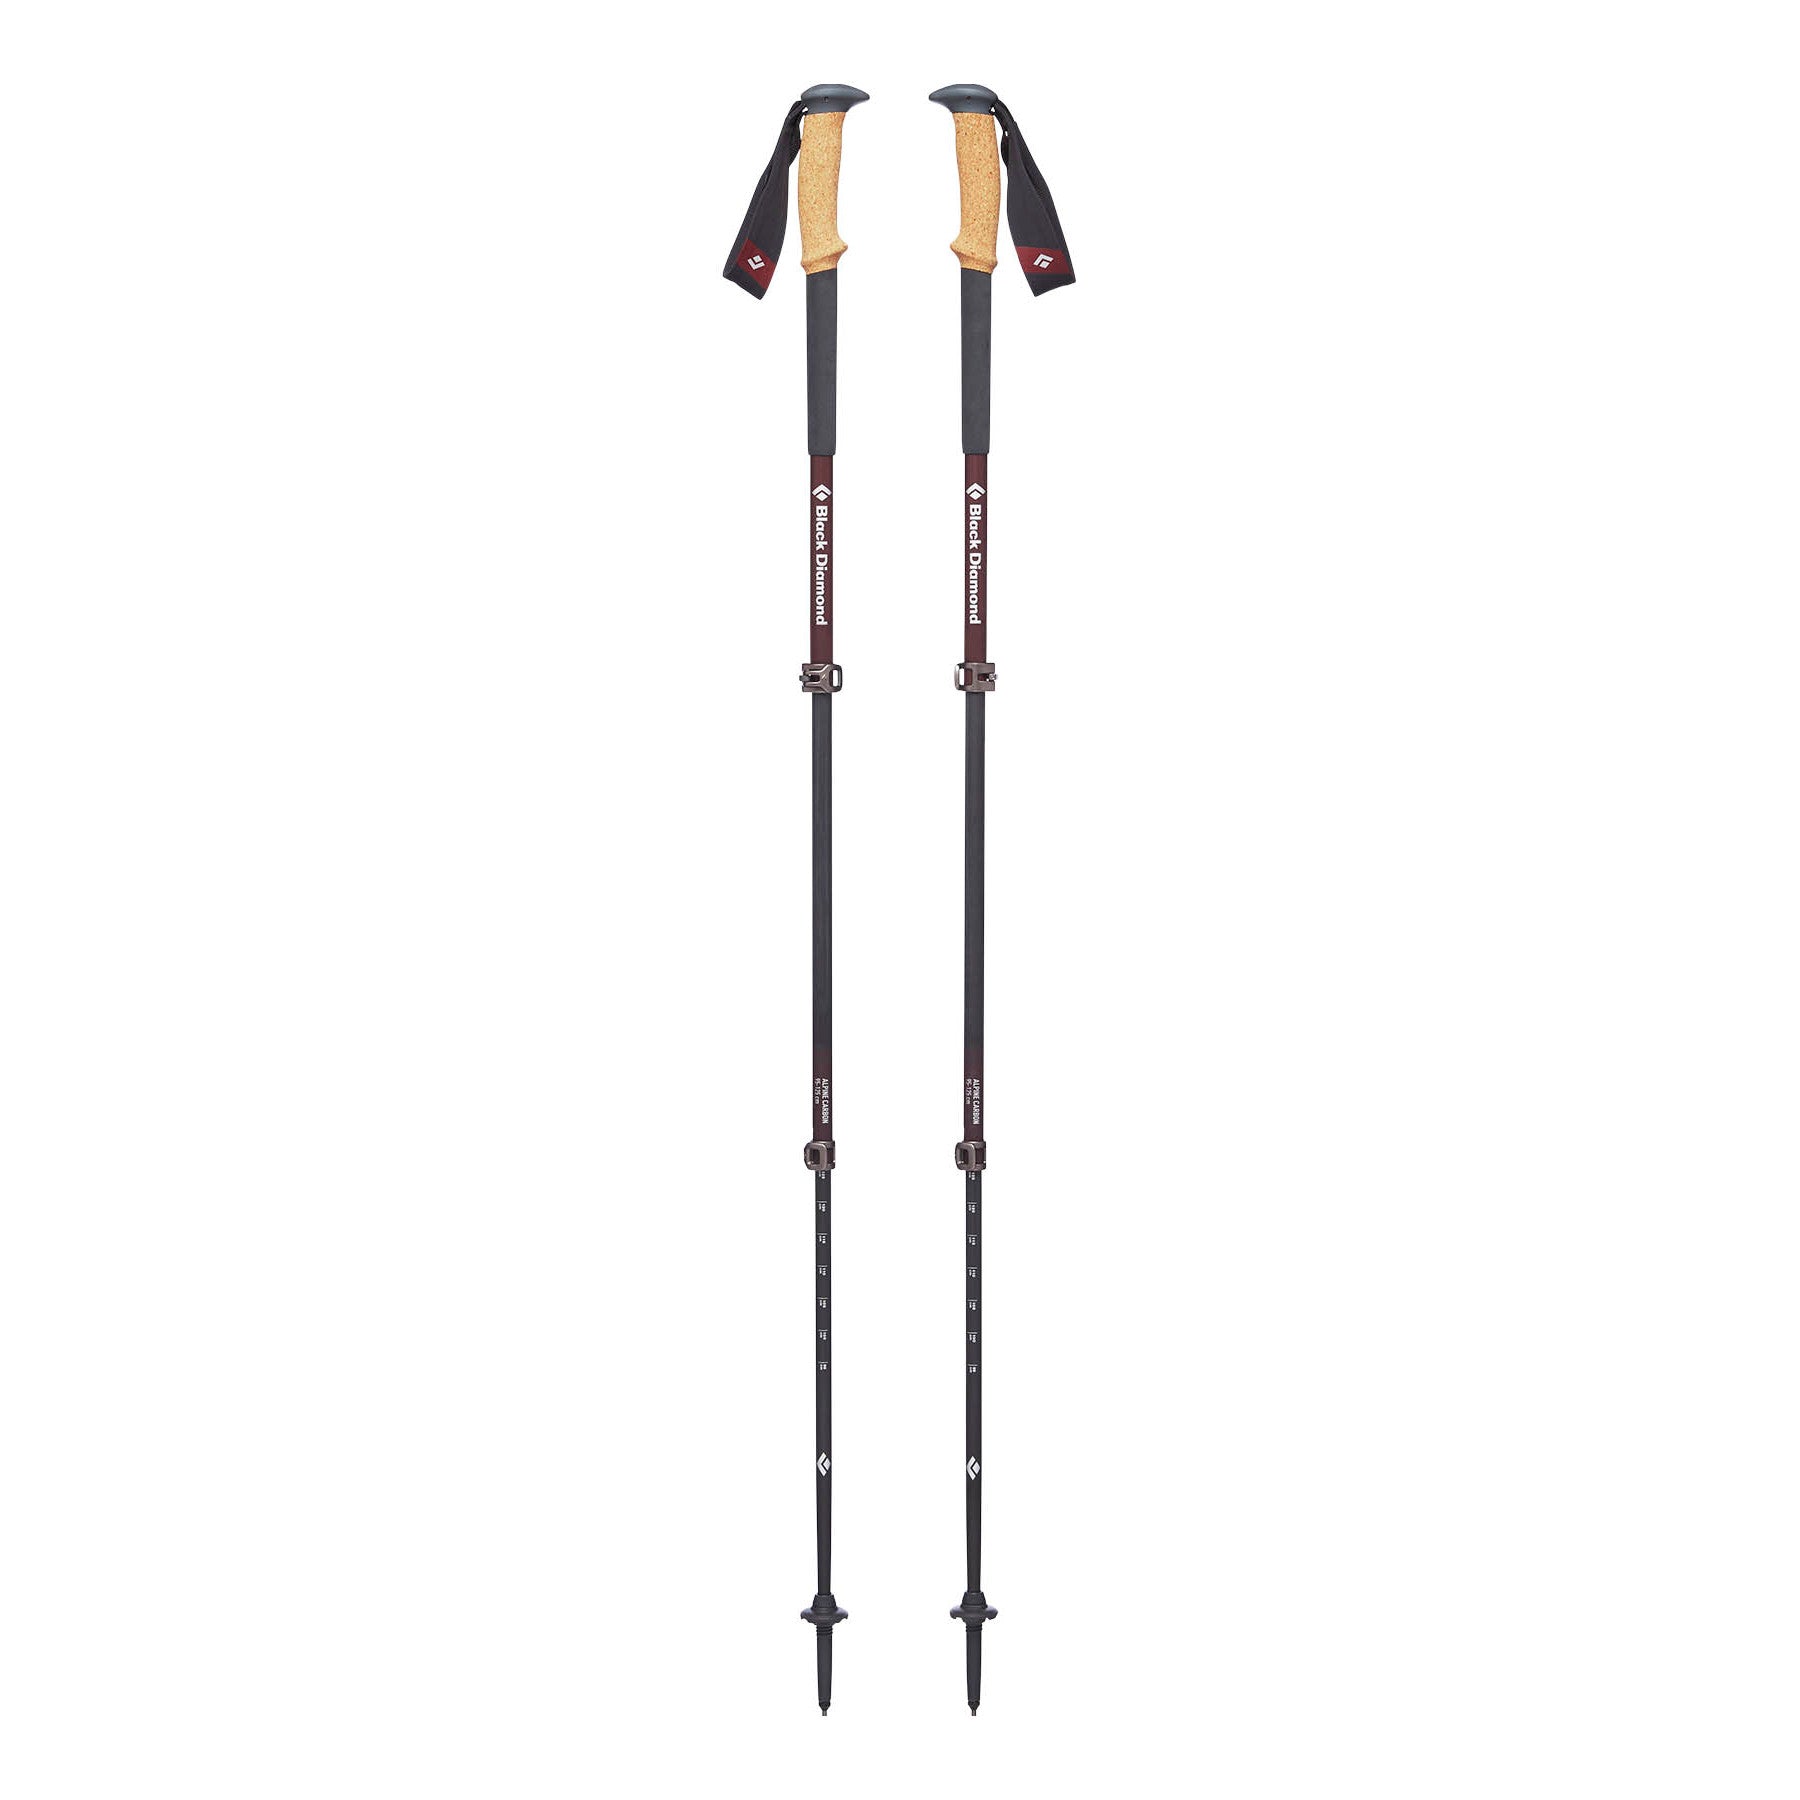 Pair of Black Diamond Alpine Carbon Cork Womens poles, shown fully extended and stood upright